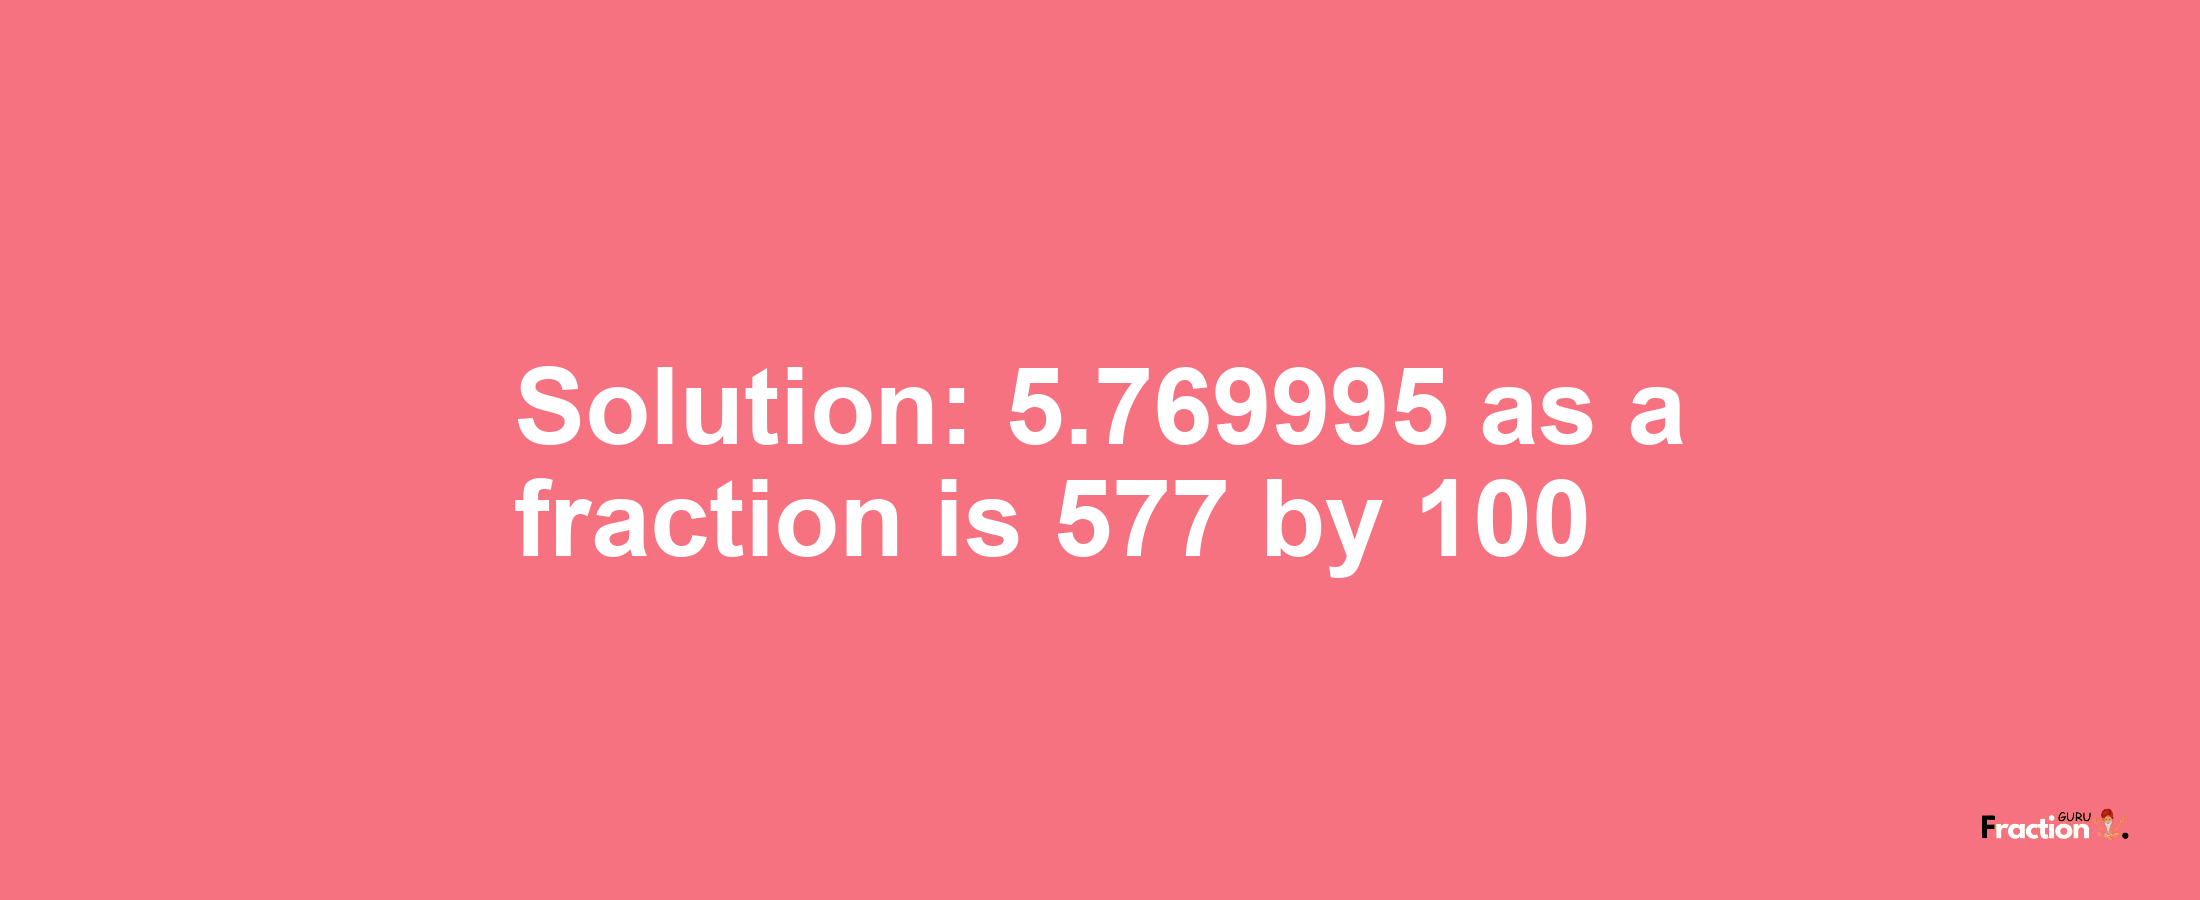 Solution:5.769995 as a fraction is 577/100